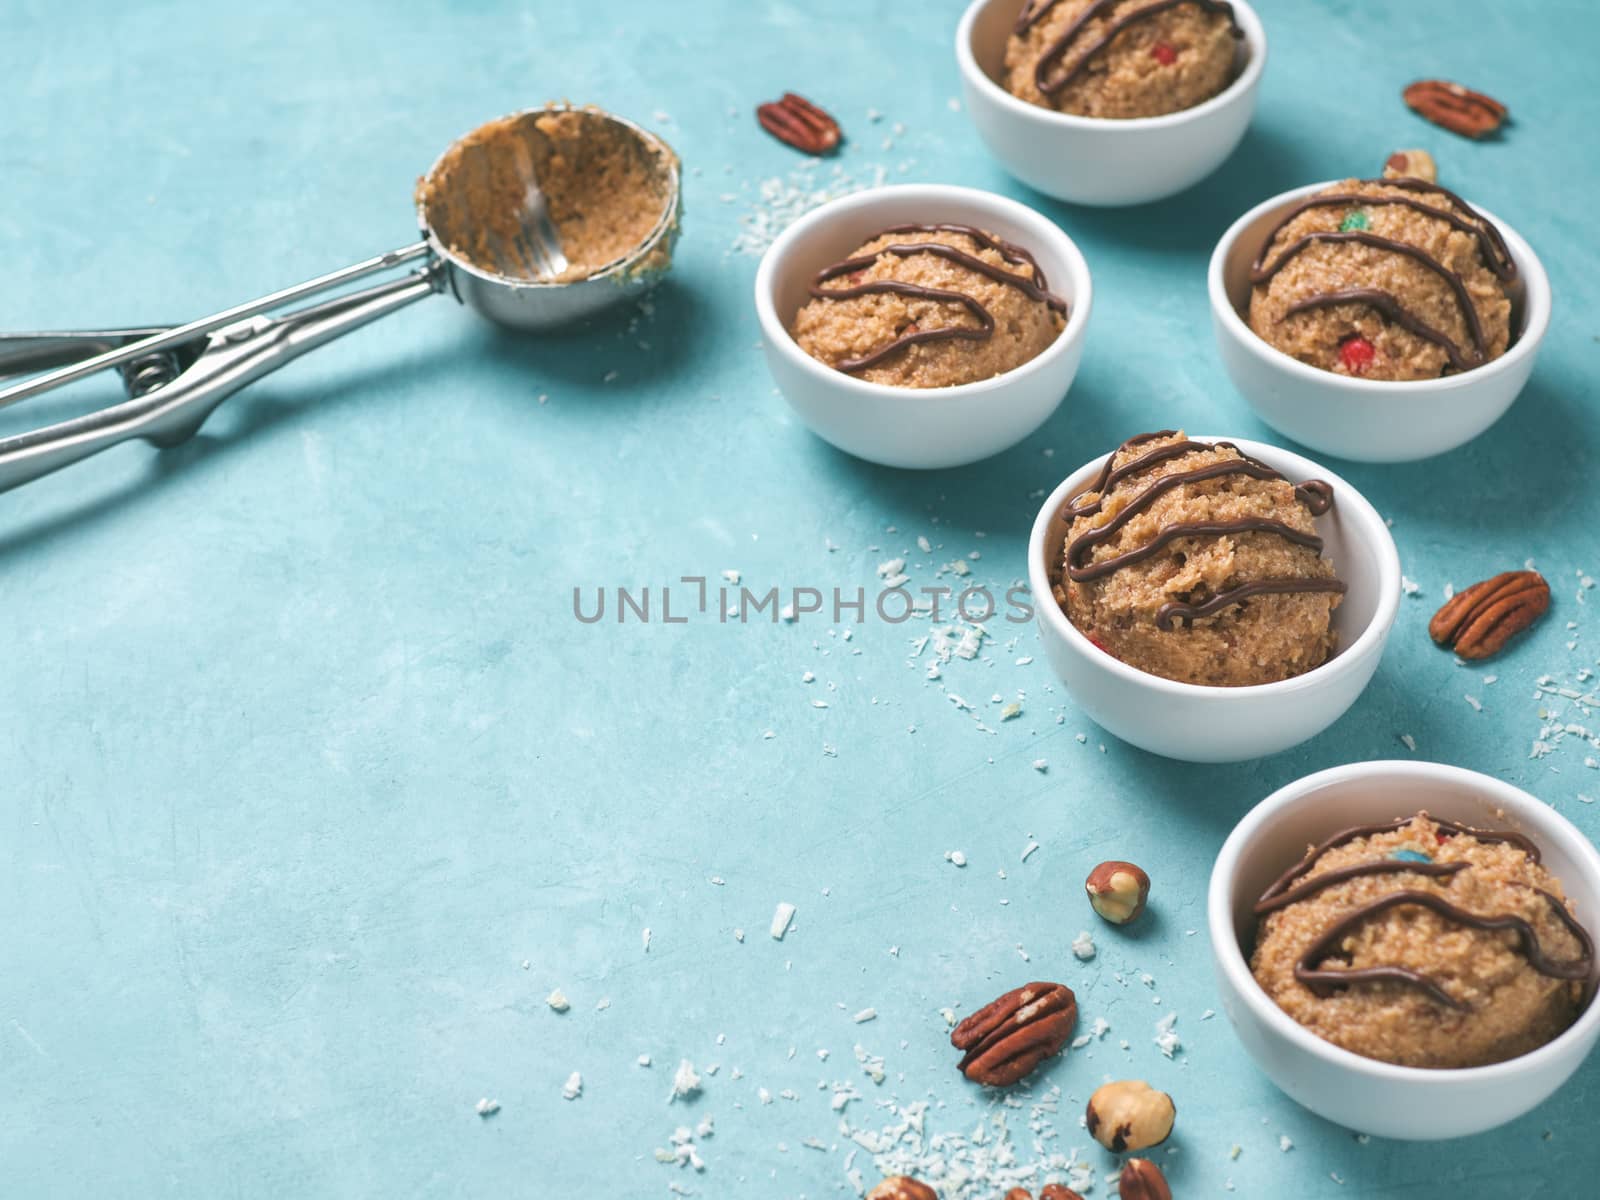 Safe-to-eat raw monster cookie dough in small portion bowl, ice cream scoop and nuts on blue background. Ideas and recipes for kids and toddlers meal. Copy space for text.